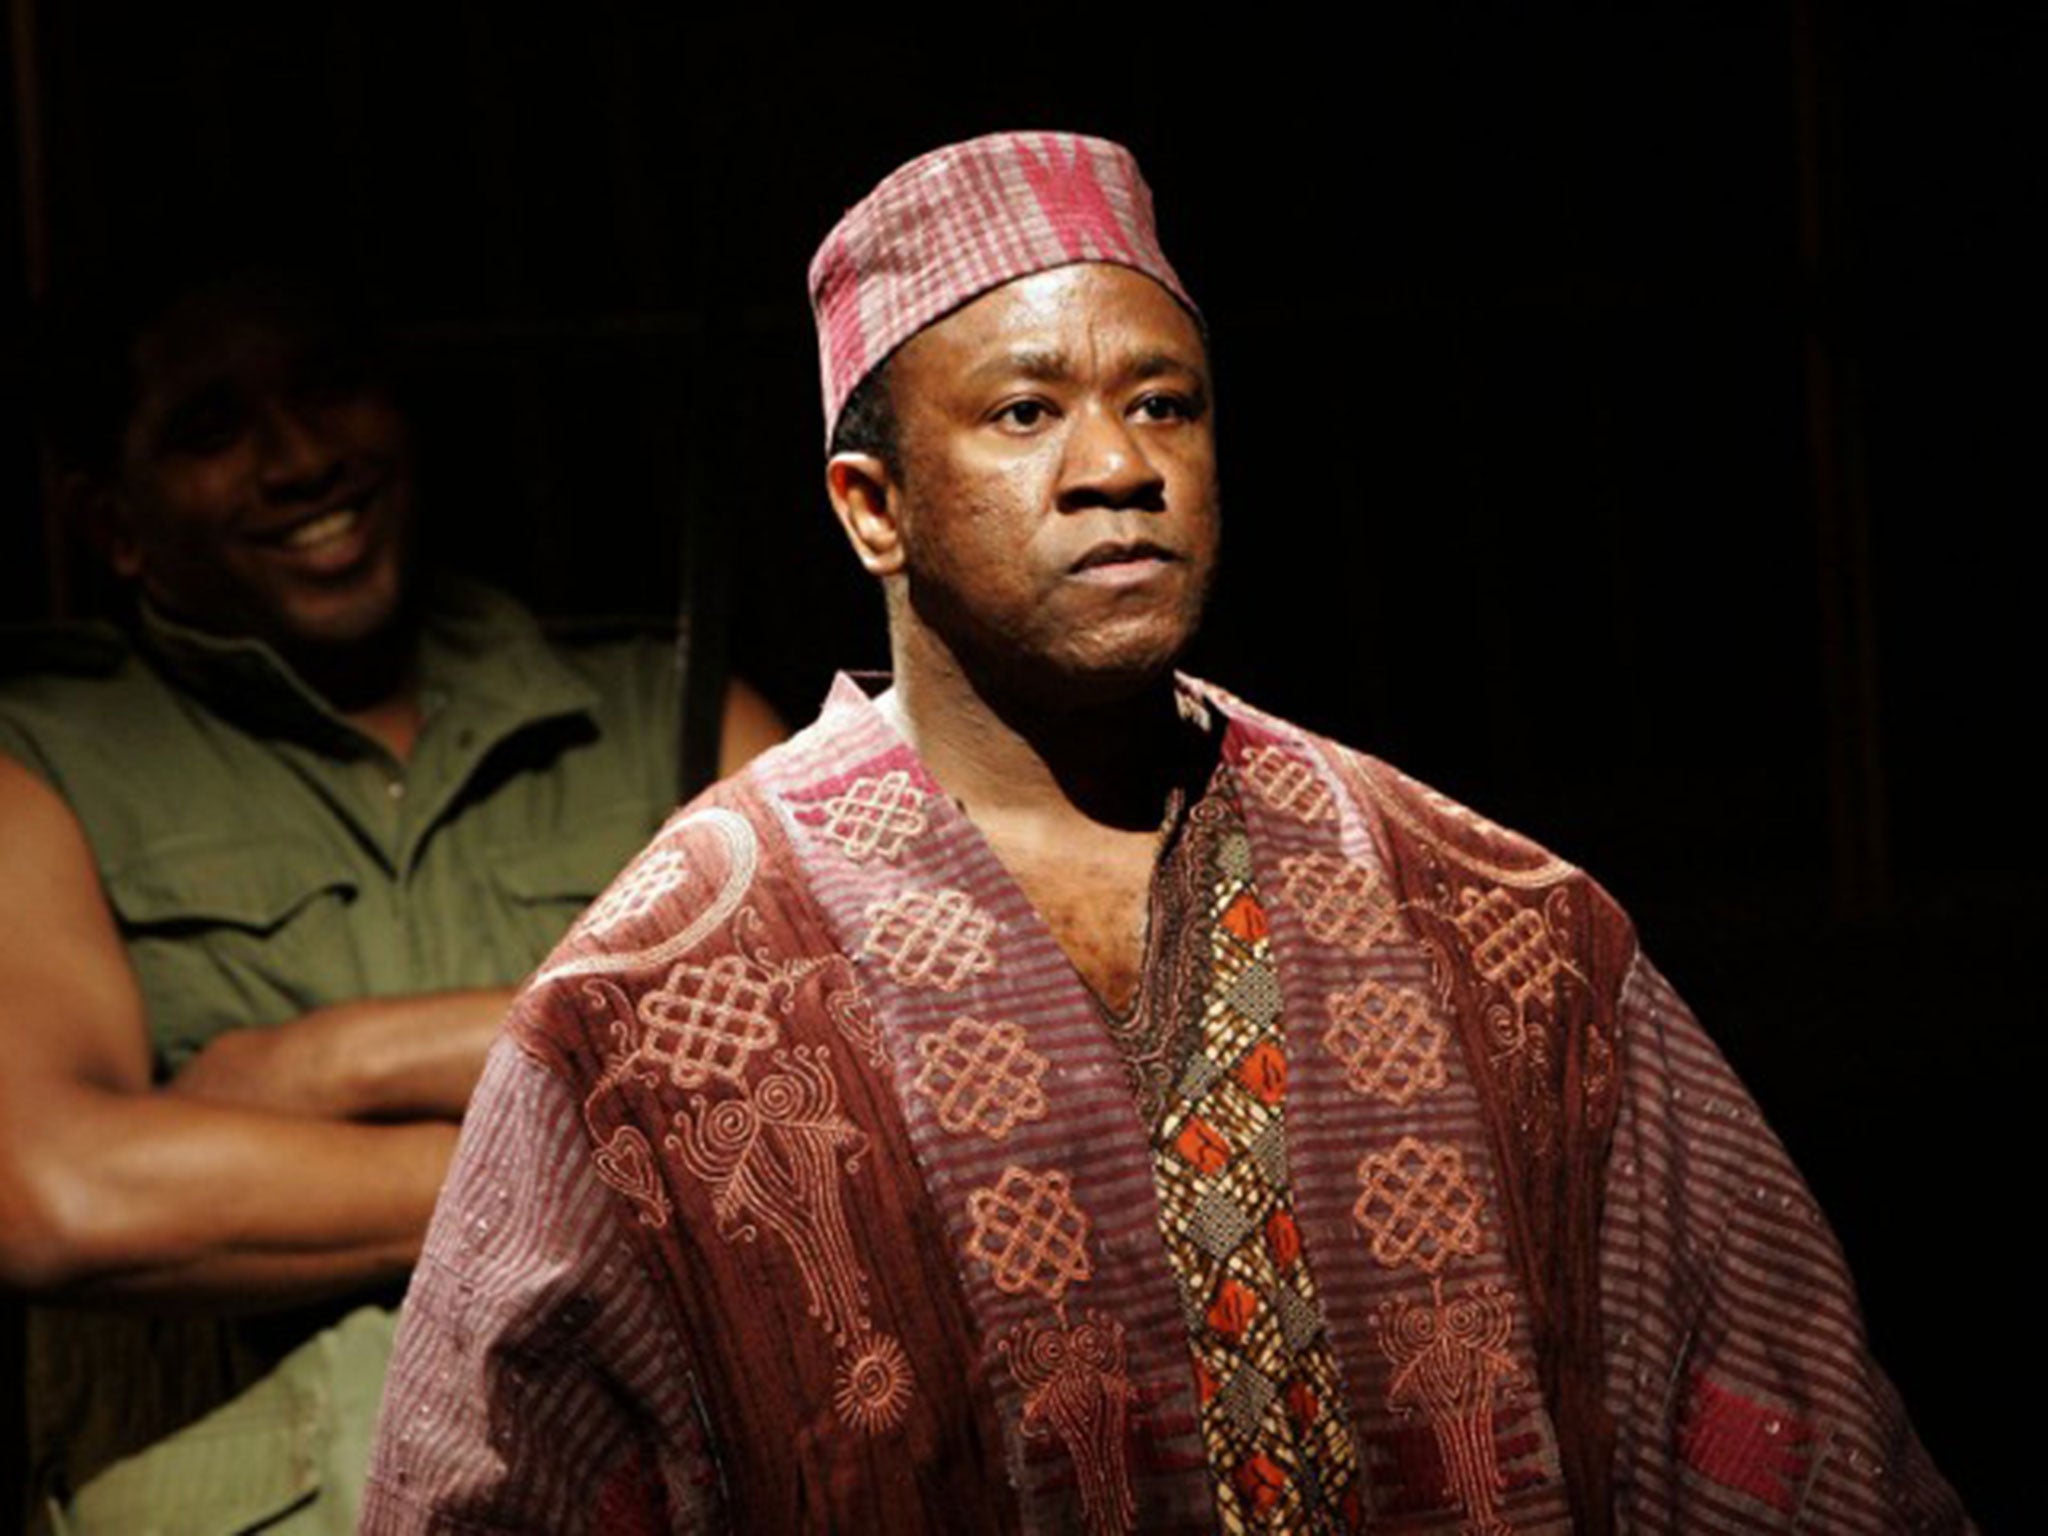 Lucian Msamati plays Pericles at the Swan Theatre in Stratford